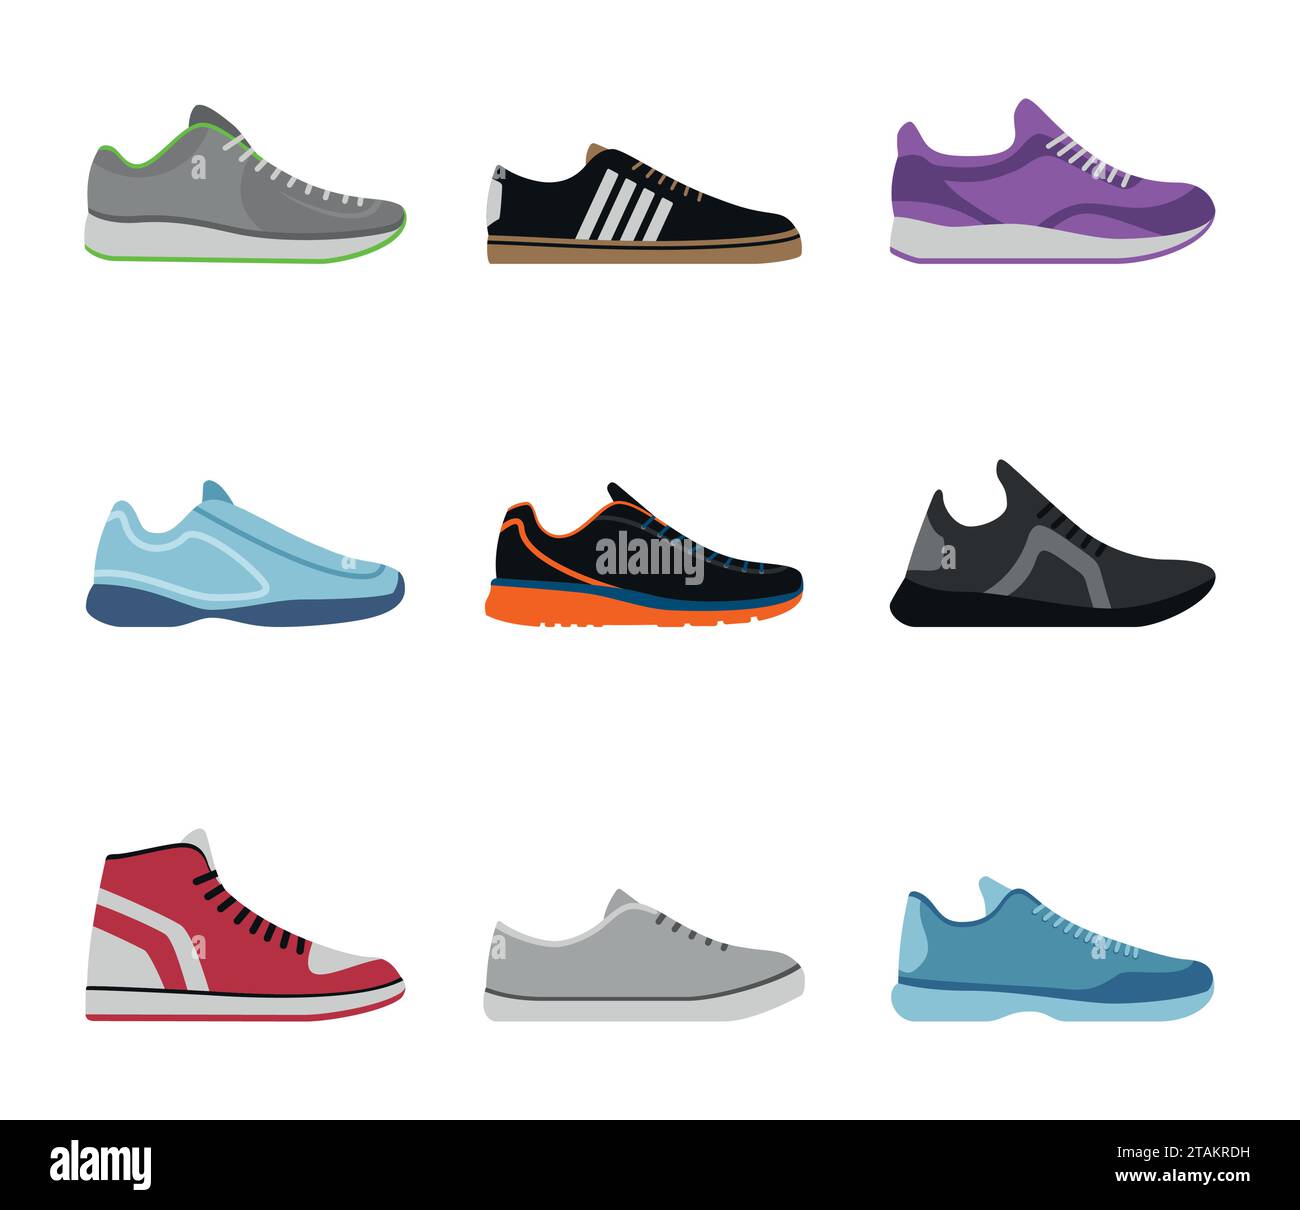 Comfortable shoes collection isolated on white background. Sportwear sneakers, everyday footwear clothing in flat style. High and low keds, footwear Stock Vector